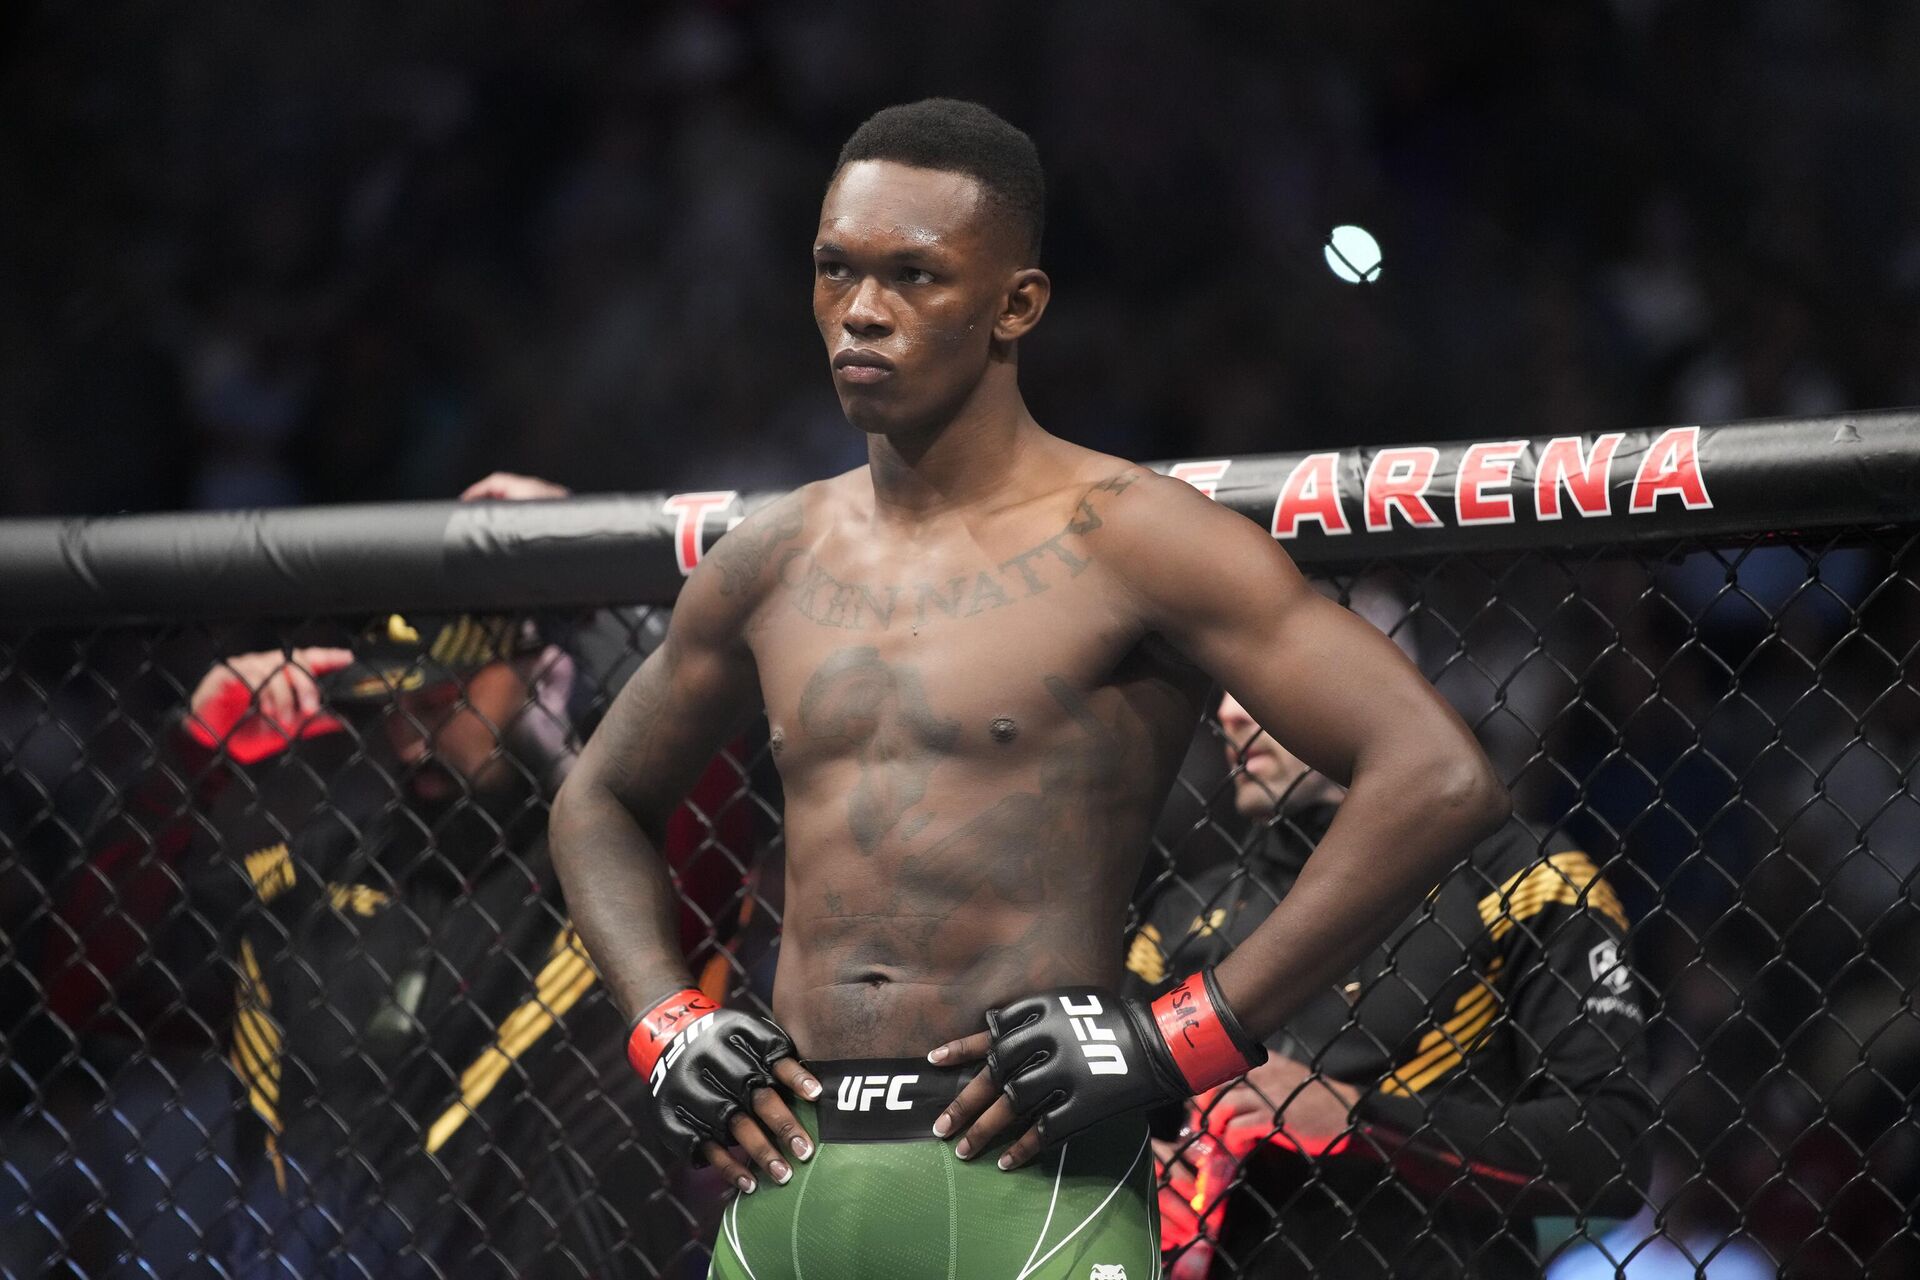 Israel Adesanya prepares to fight Jared Cannonier in a middleweight title bout during the UFC 276 mixed martial arts event Saturday, July 2, 2022, in Las Vegas. - Sputnik International, 1920, 17.01.2023